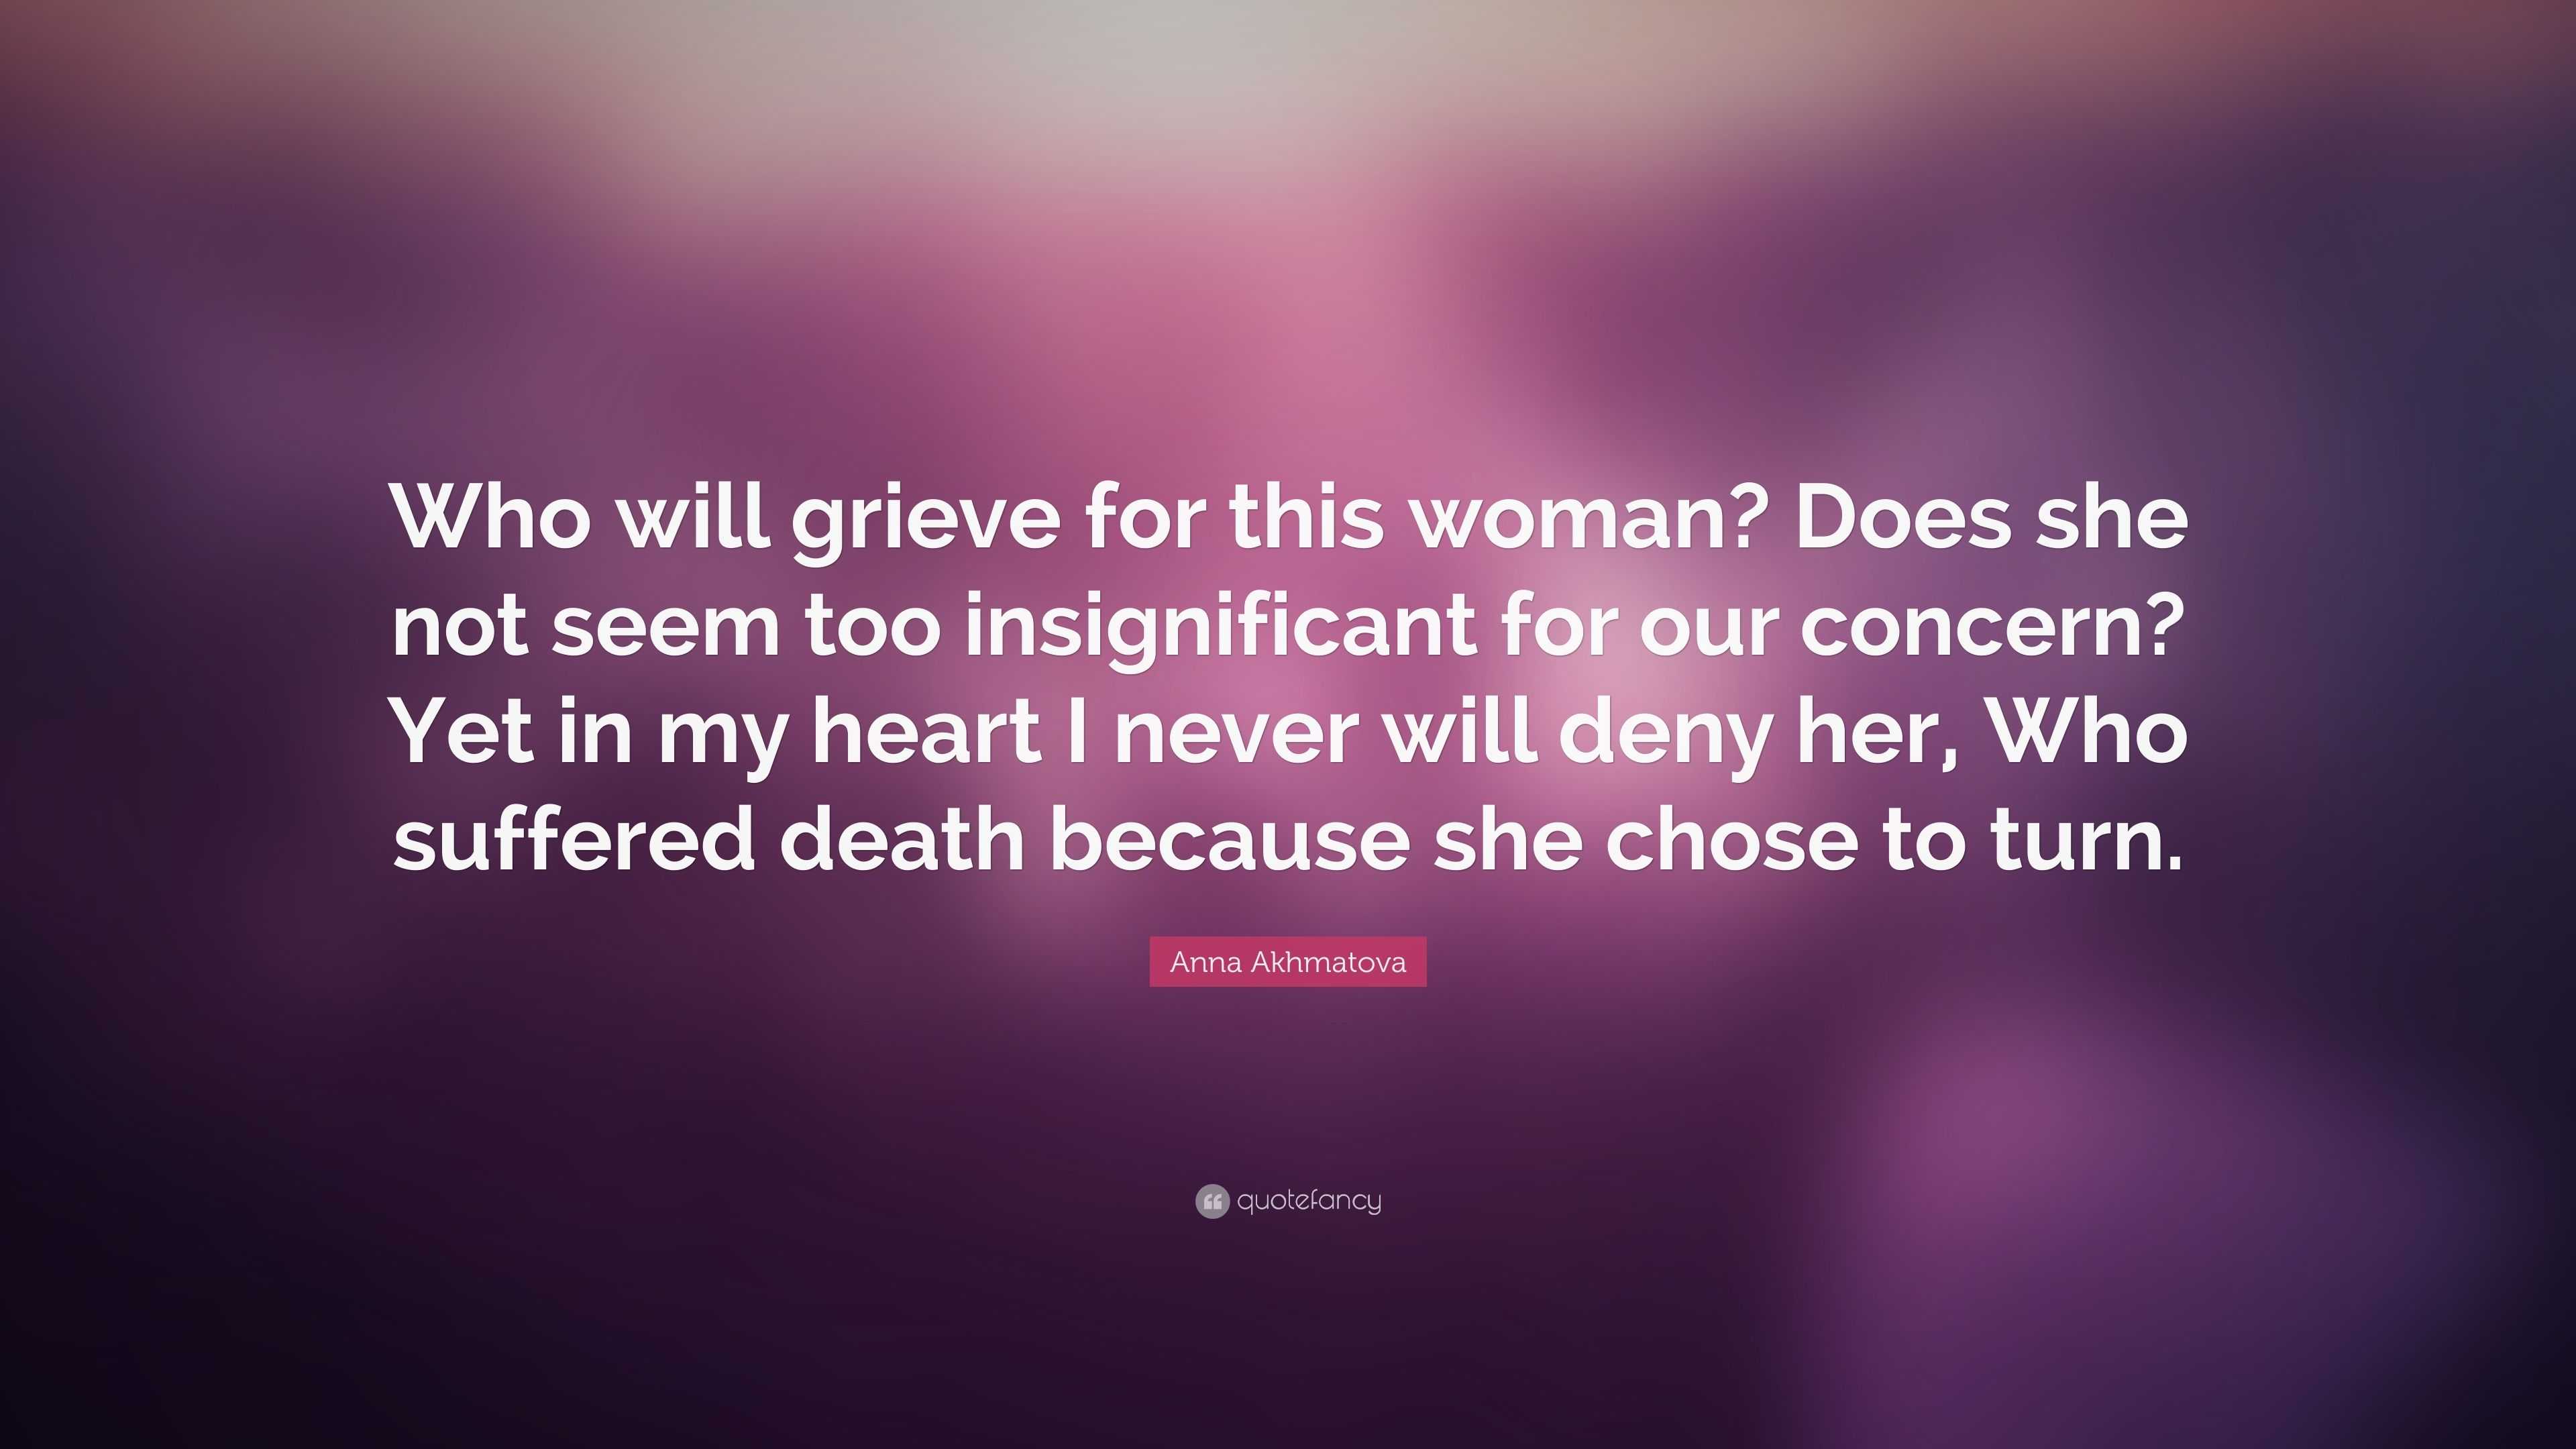 Anna Akhmatova Quote: “Who will grieve for this woman? Does she not ...